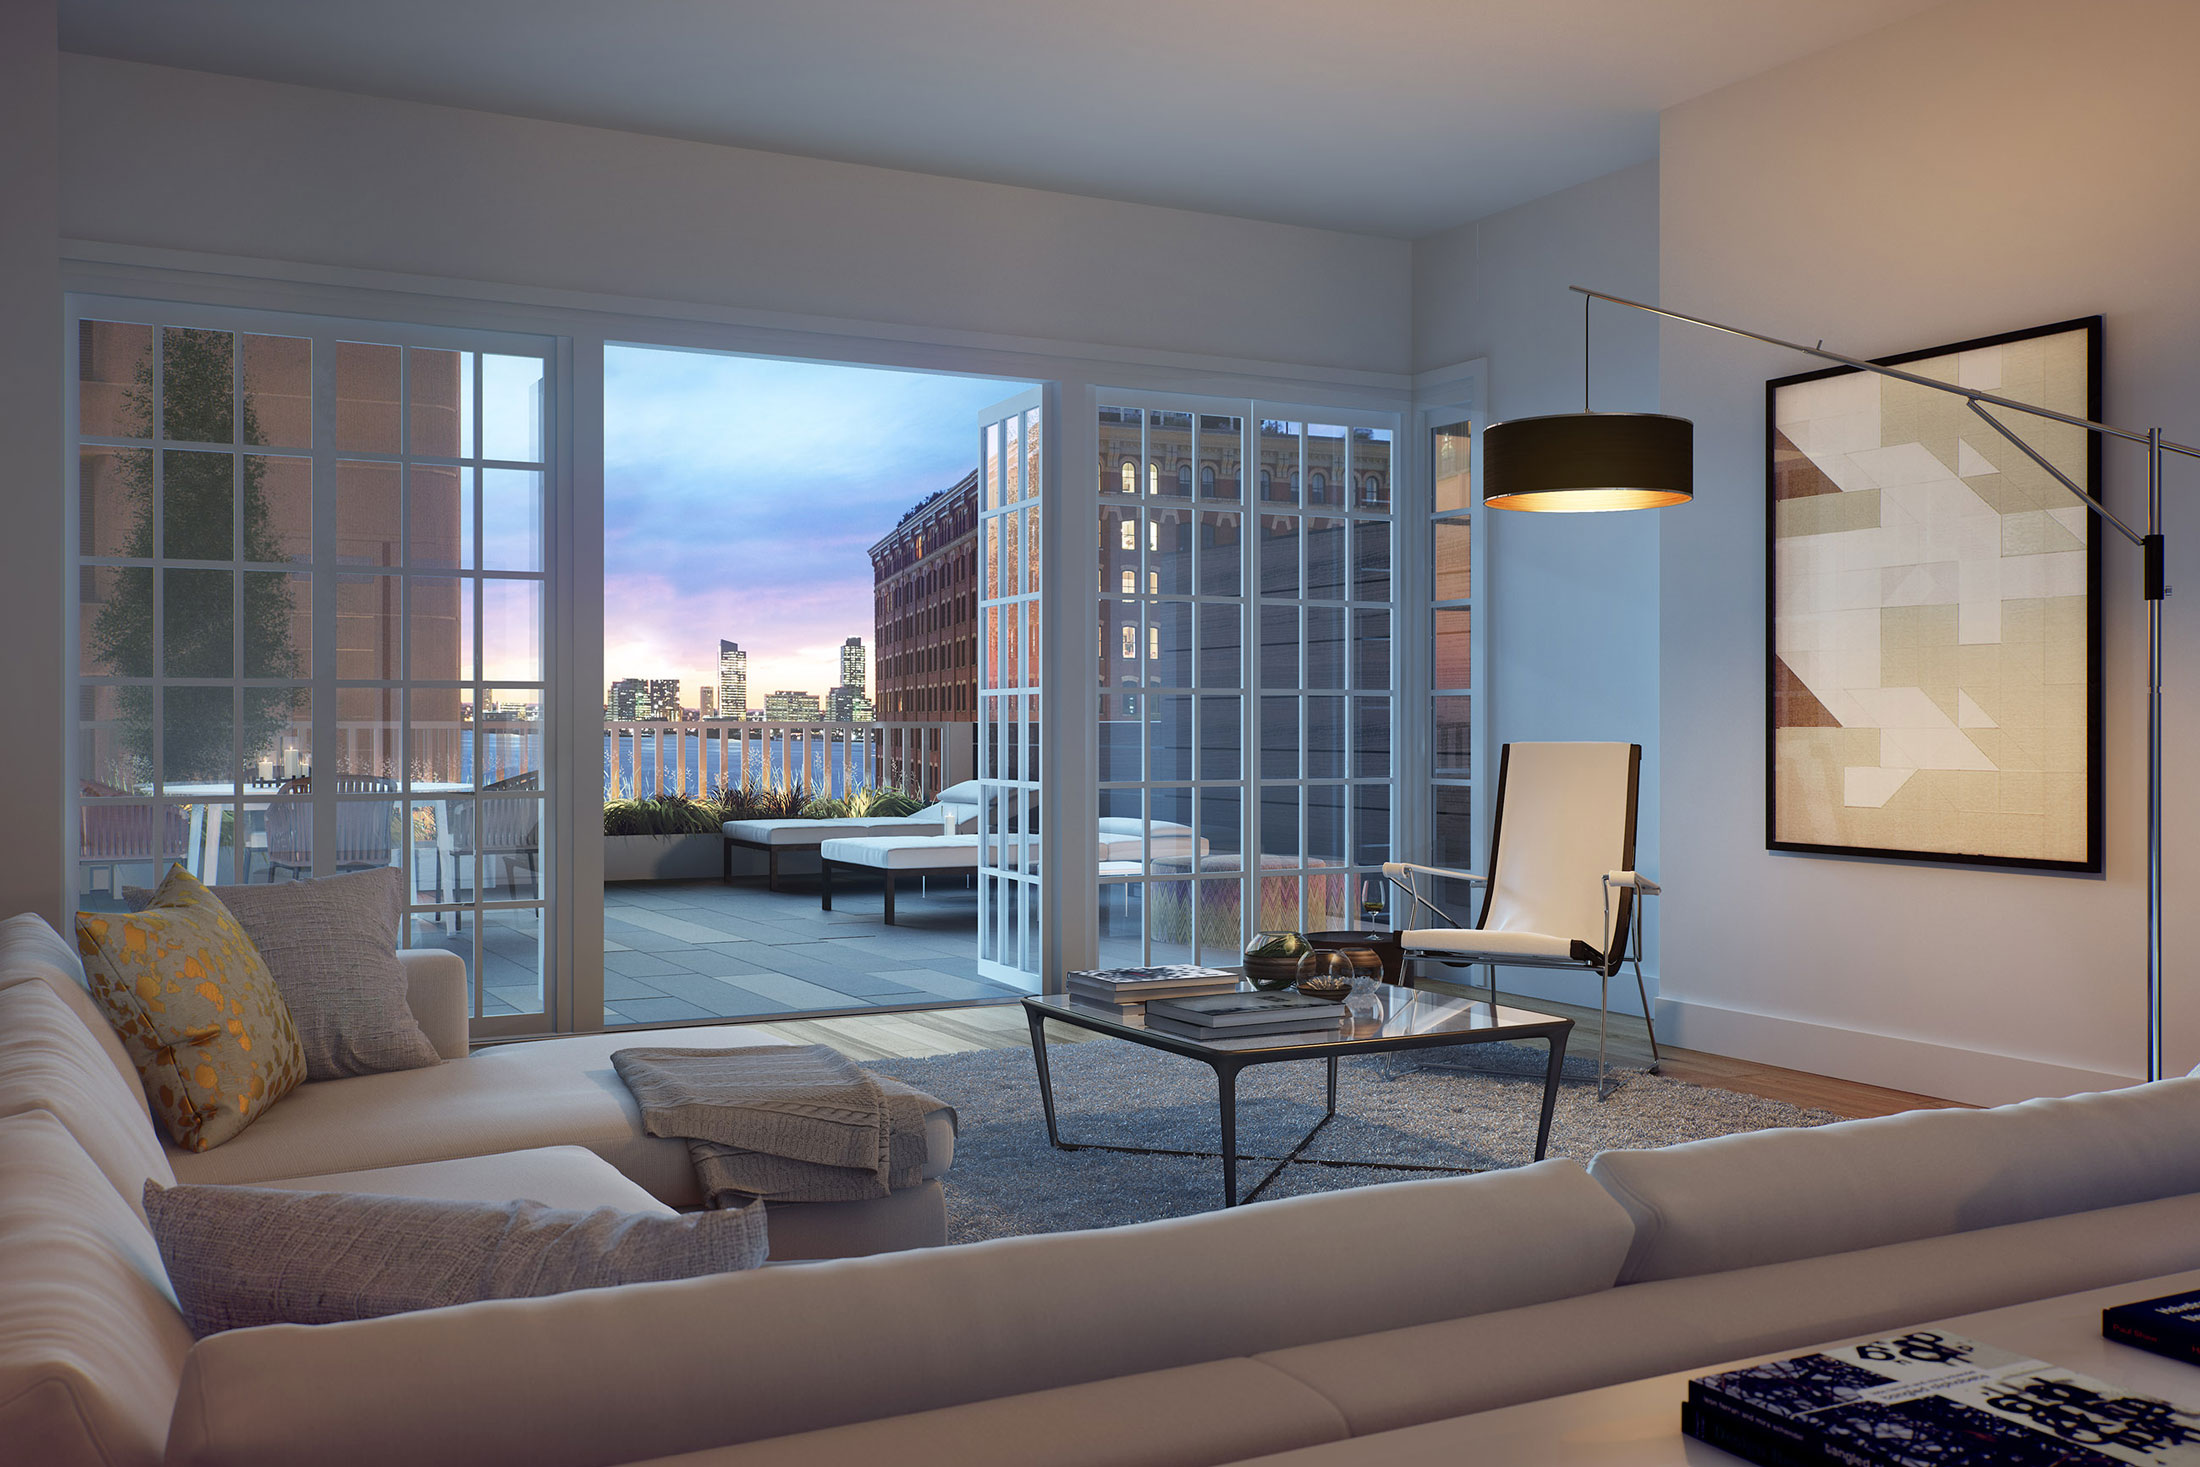 Architectural Rendering of the interior of the 15 Hubert Street project located in Tribeca, New York City